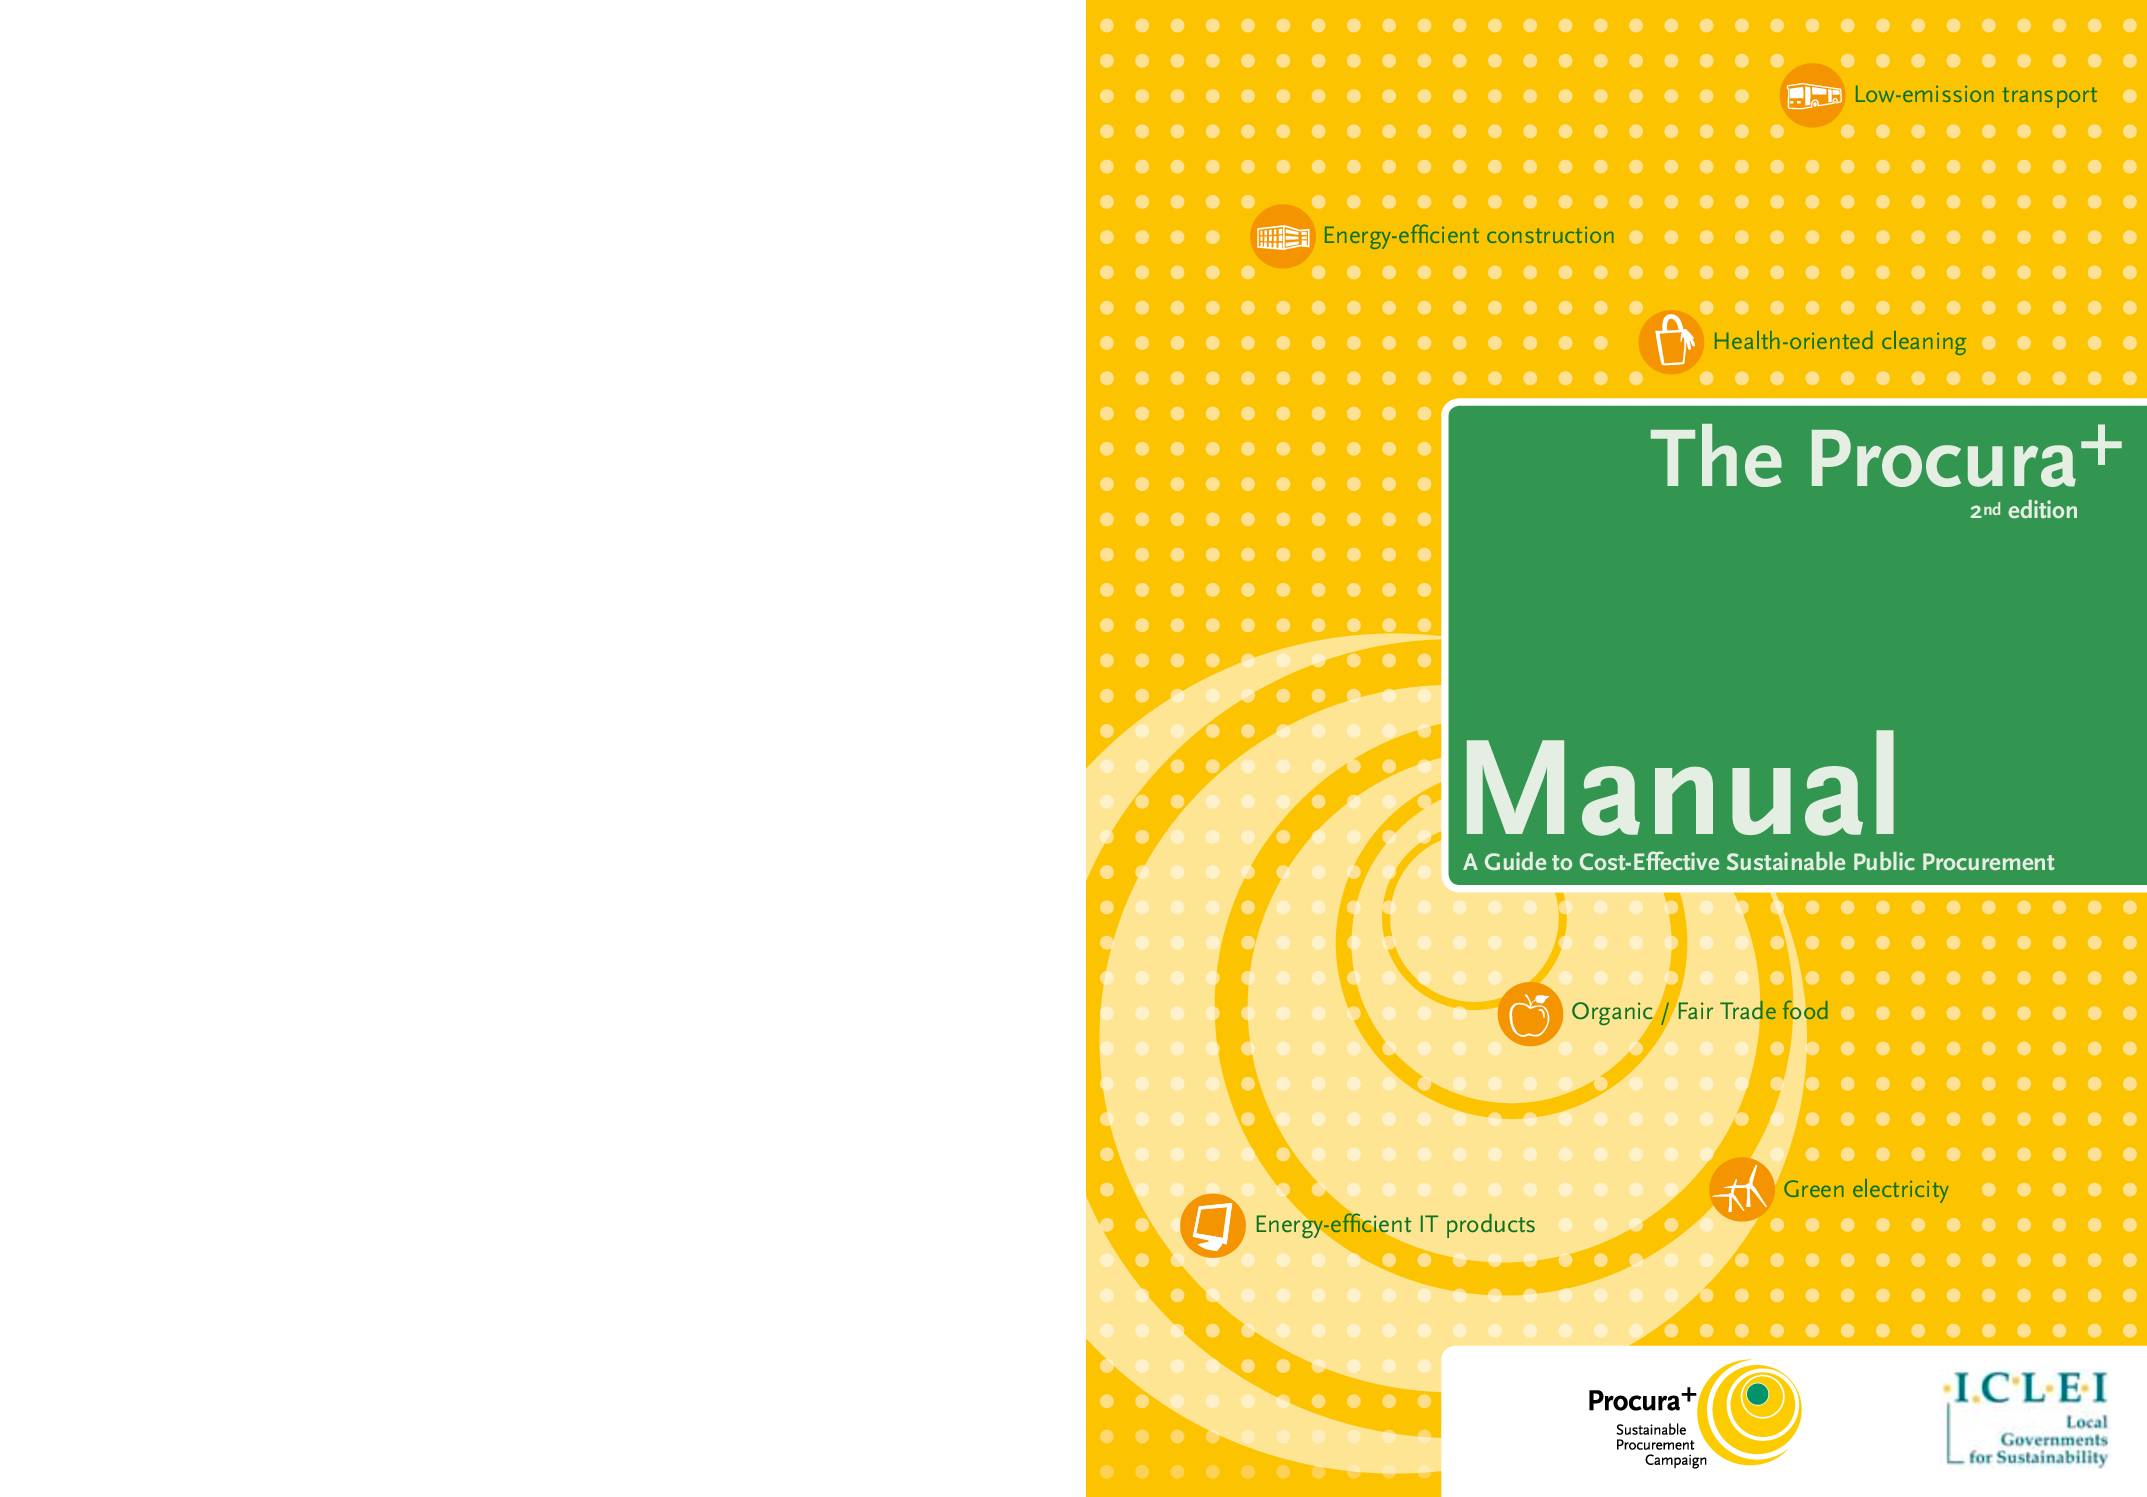 The Procura+ Manual: A Guide to Cost-Effective Sustainable Public Procurement